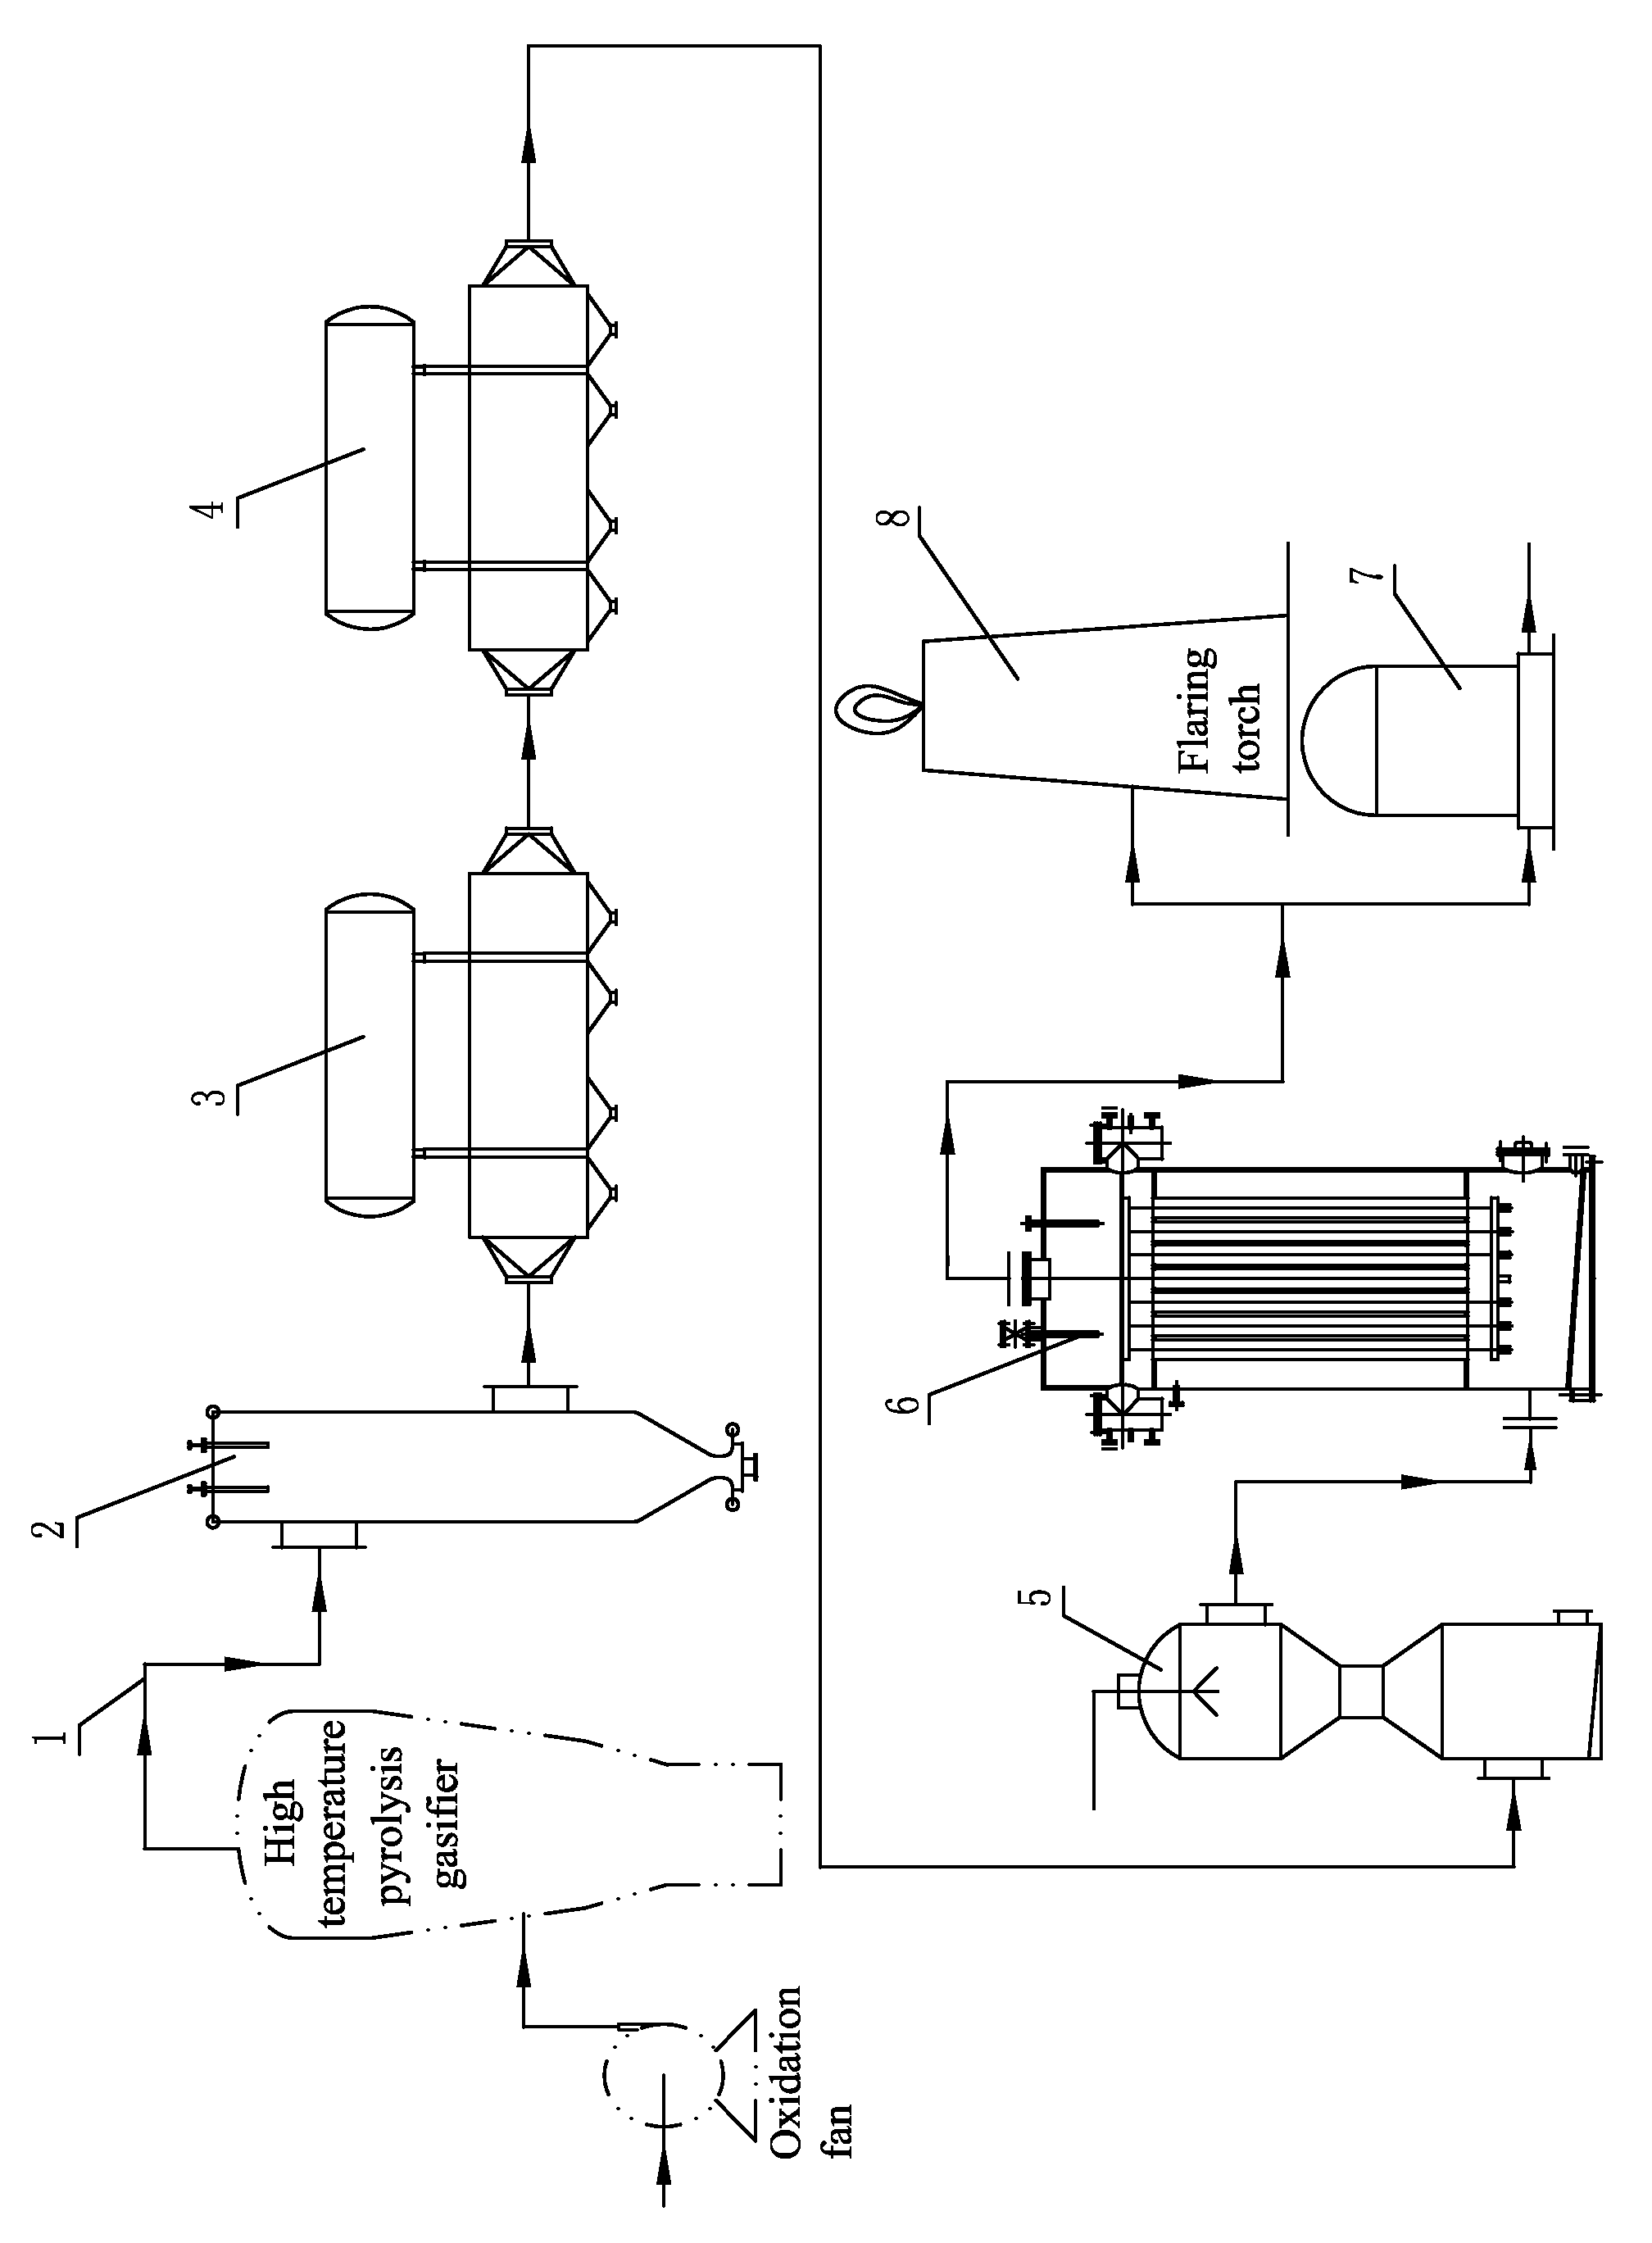 Method of purification of biomass syngas under positive pressure